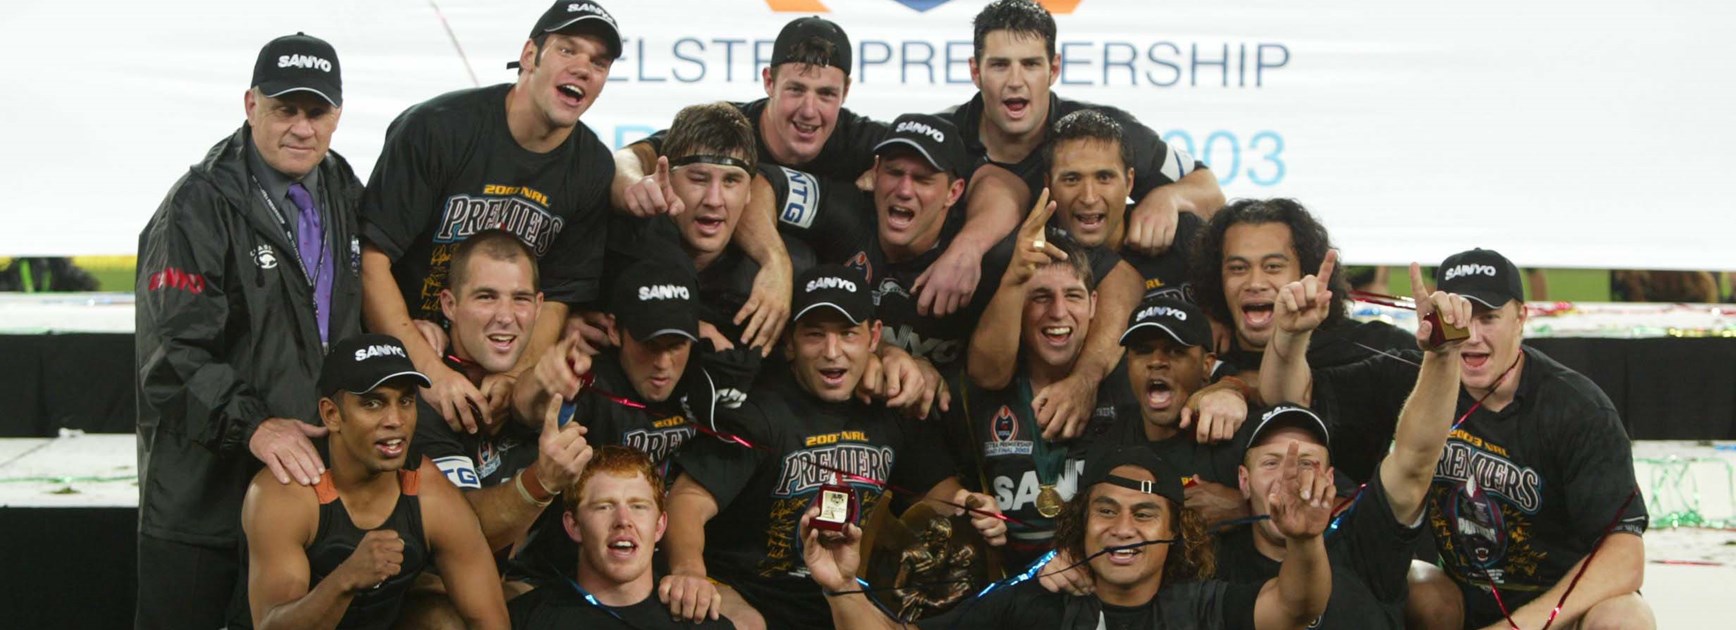 The Panthers celebrate their 2001 premiership.